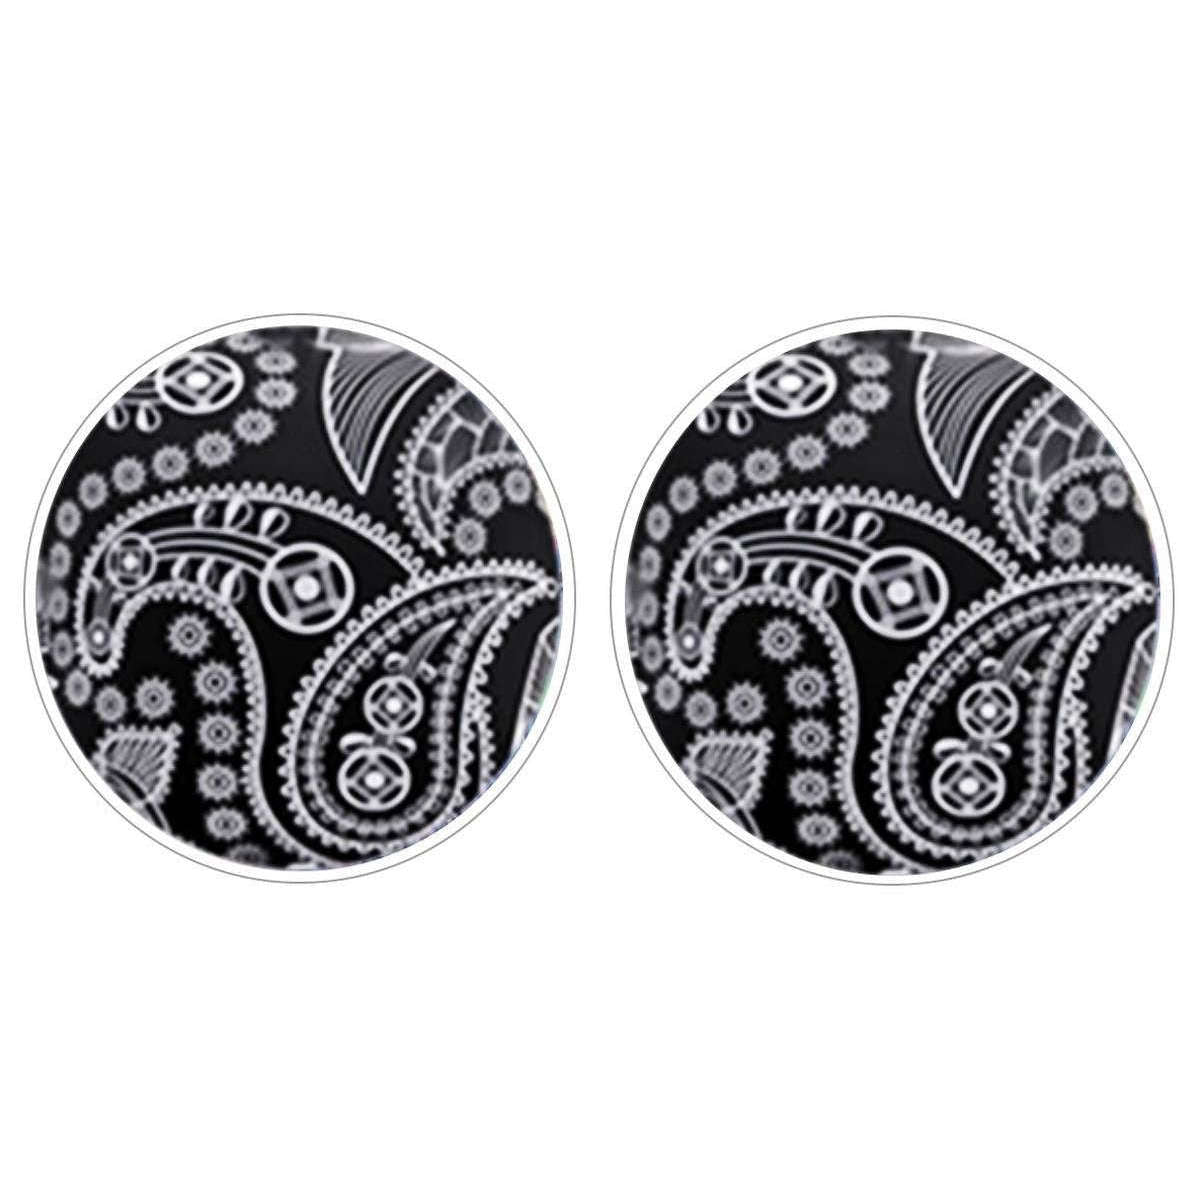 Bassin and Brown Paisley Cufflinks - Black/White